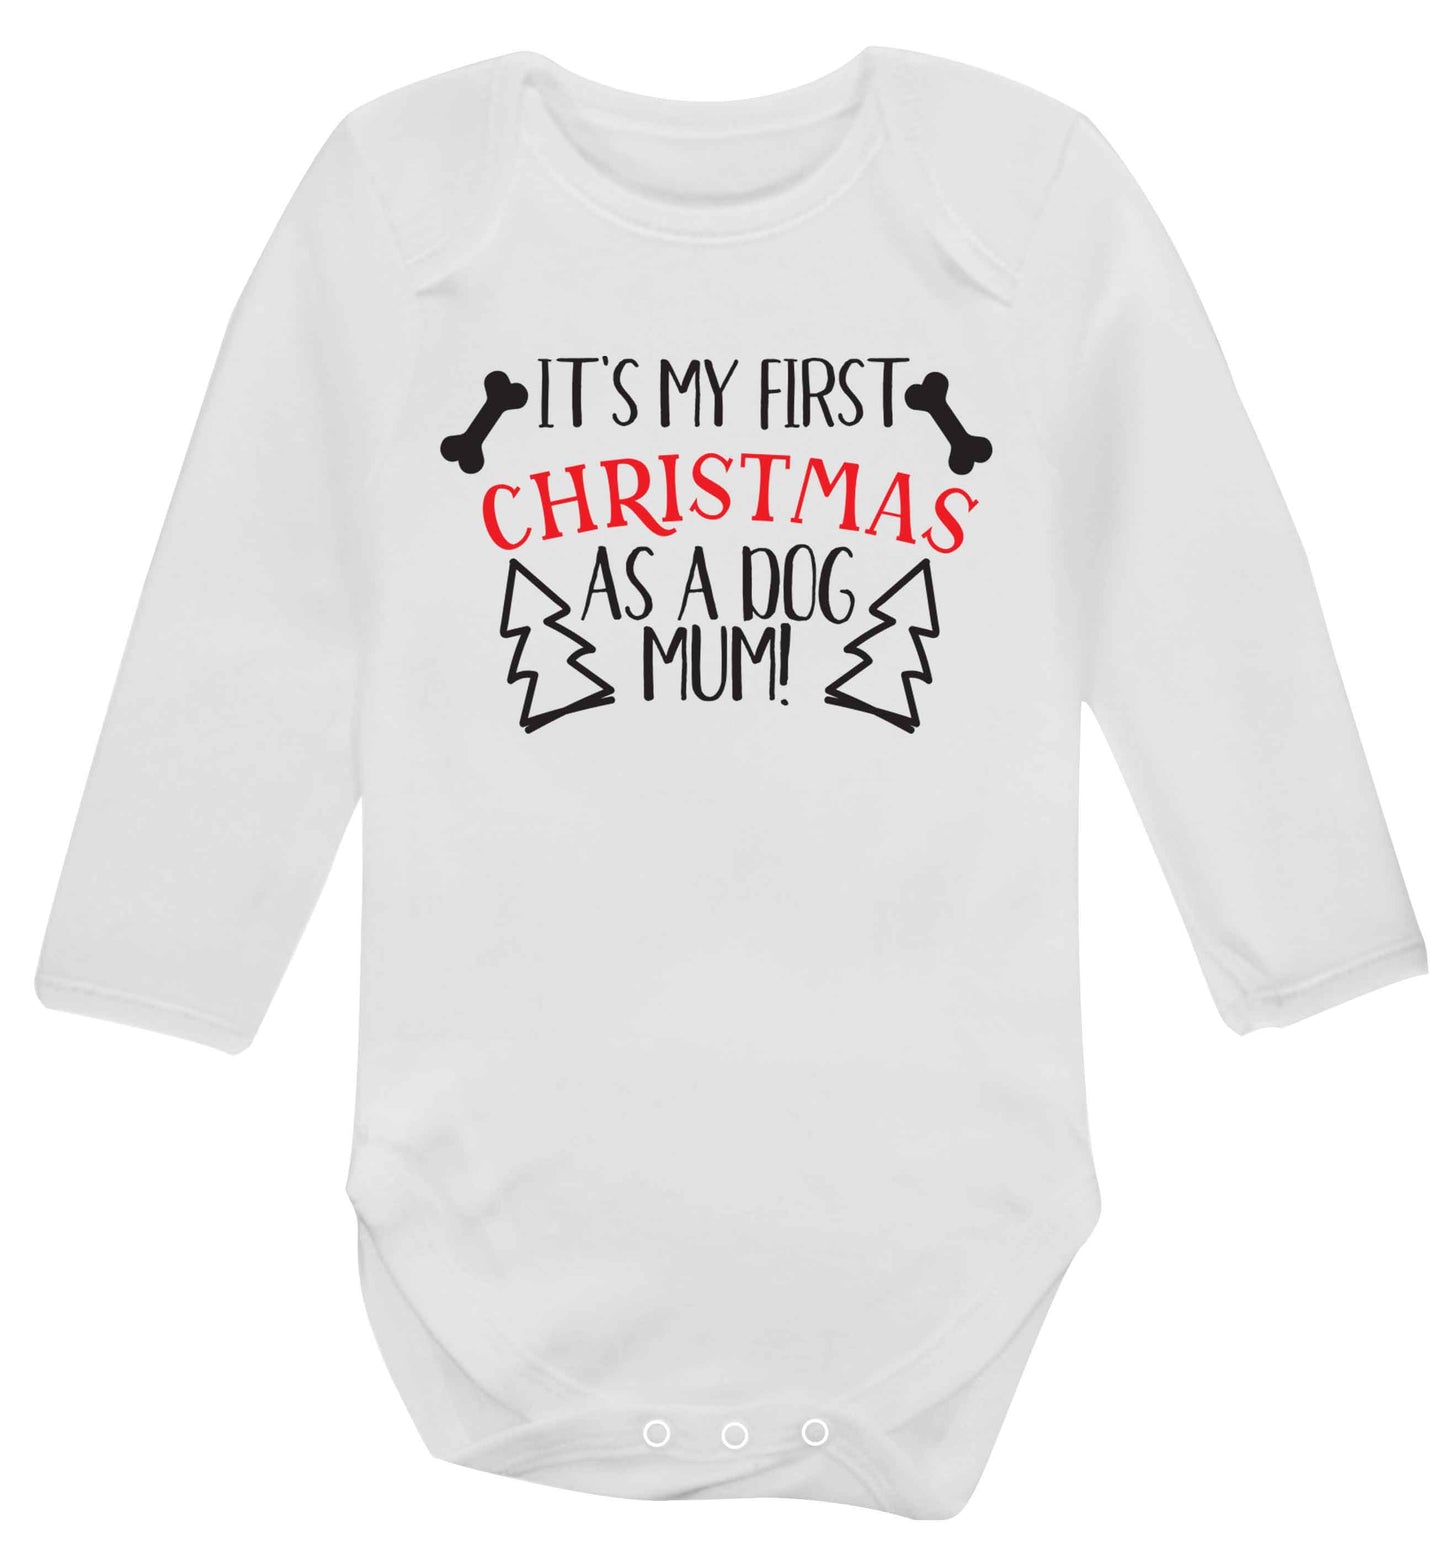 It's my first Christmas as a dog mum! Baby Vest long sleeved white 6-12 months